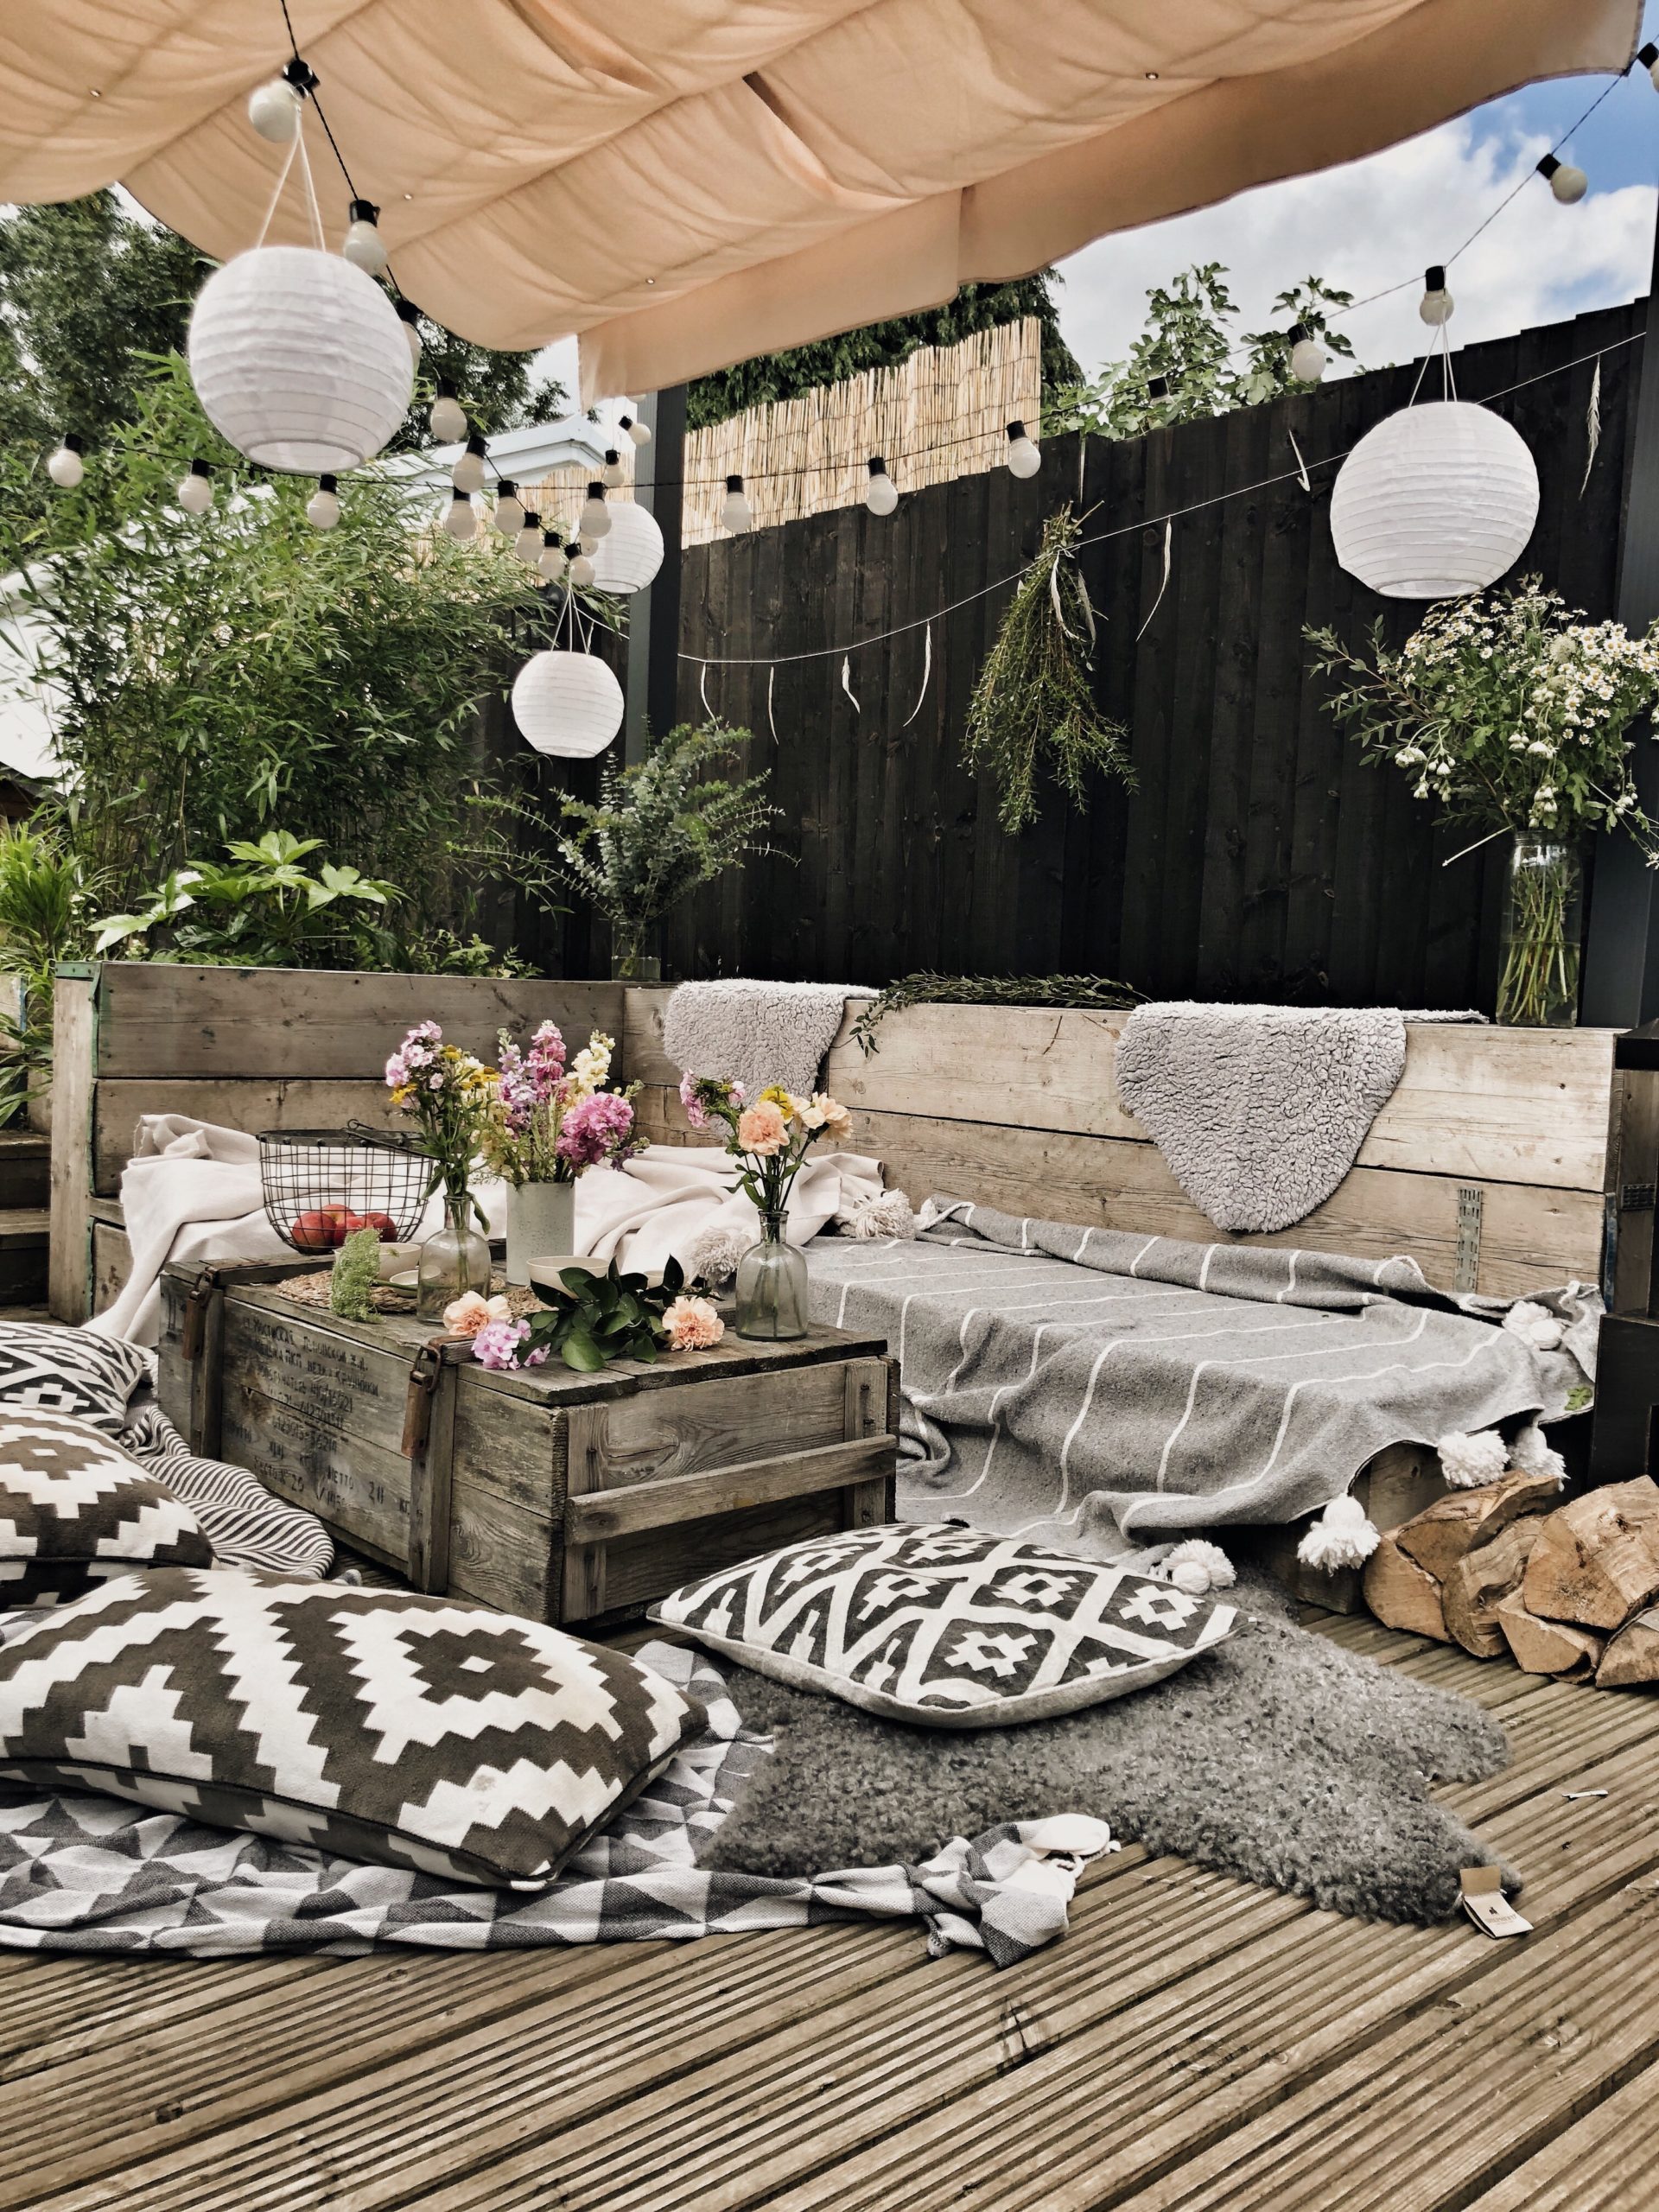 Bringing the indoors outdoors: A Cosy Modern Rustic Garden Design